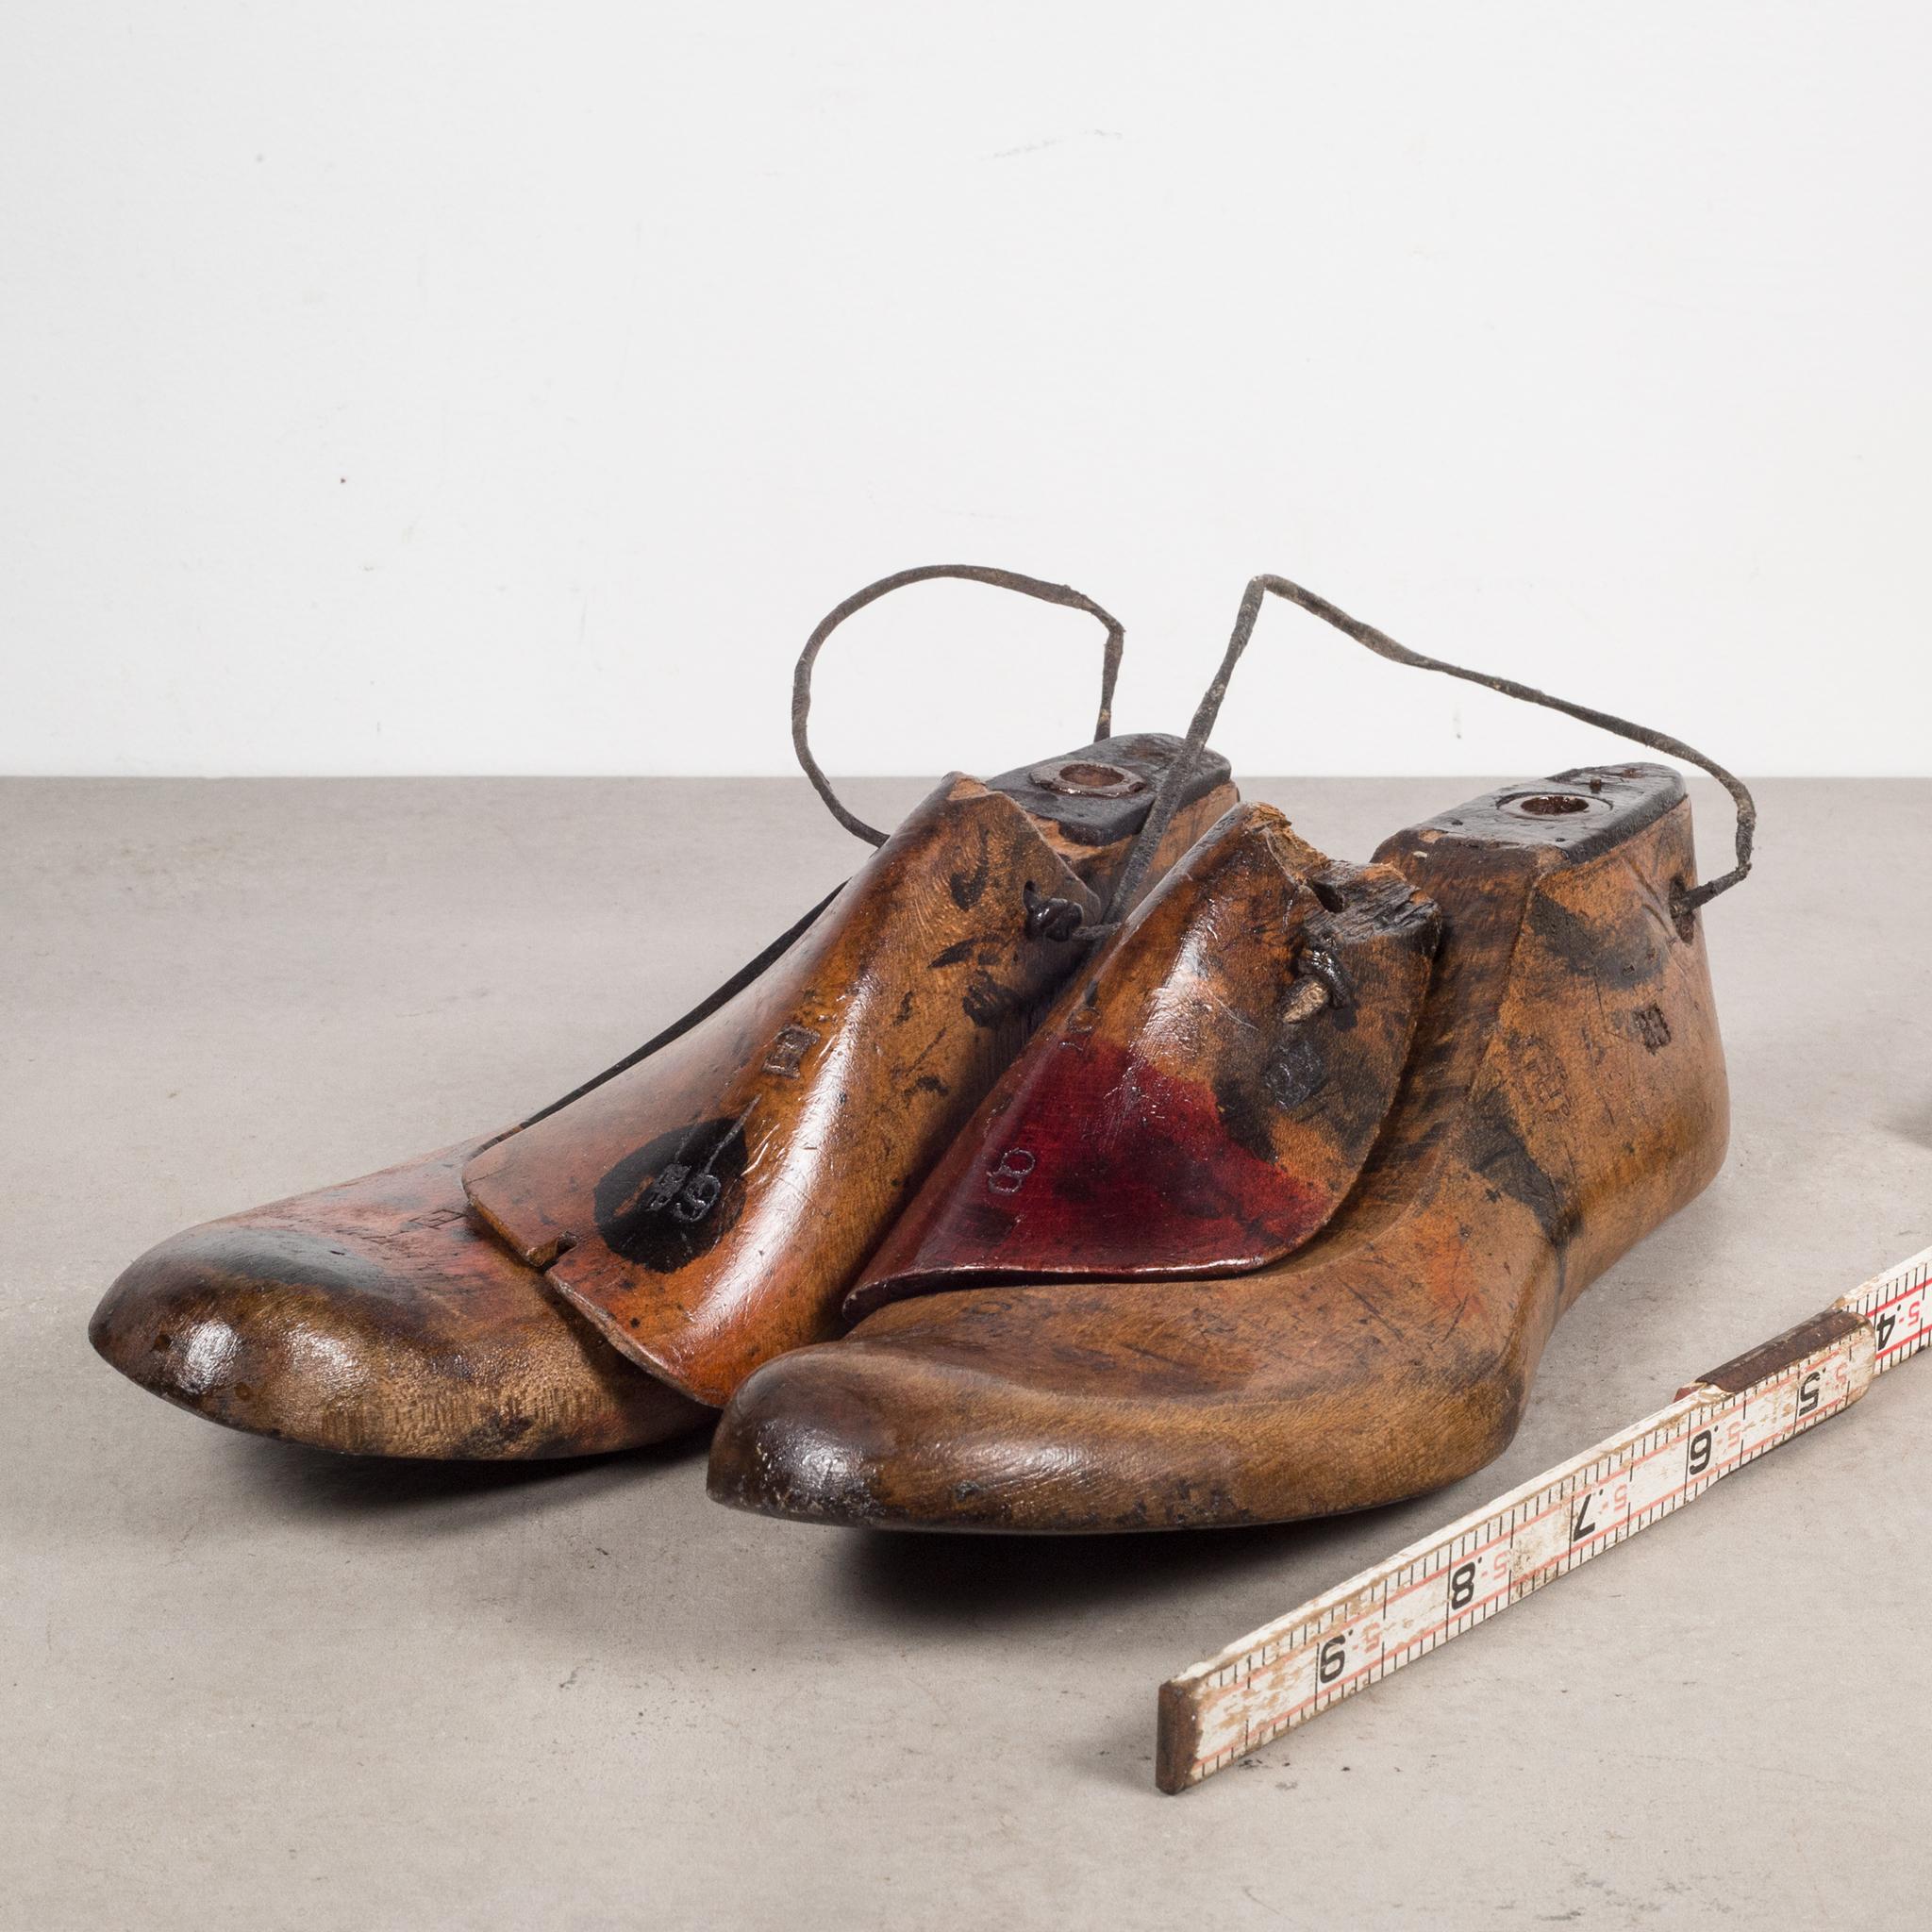 About

Price is per pair.

Original pairs of cobbler's wooden shoe last used to make hand crafted shoes for certain clients. The shoe last were kept at the cobbler's shop for custom shoes when the client requested a pair. Some of the shoe last